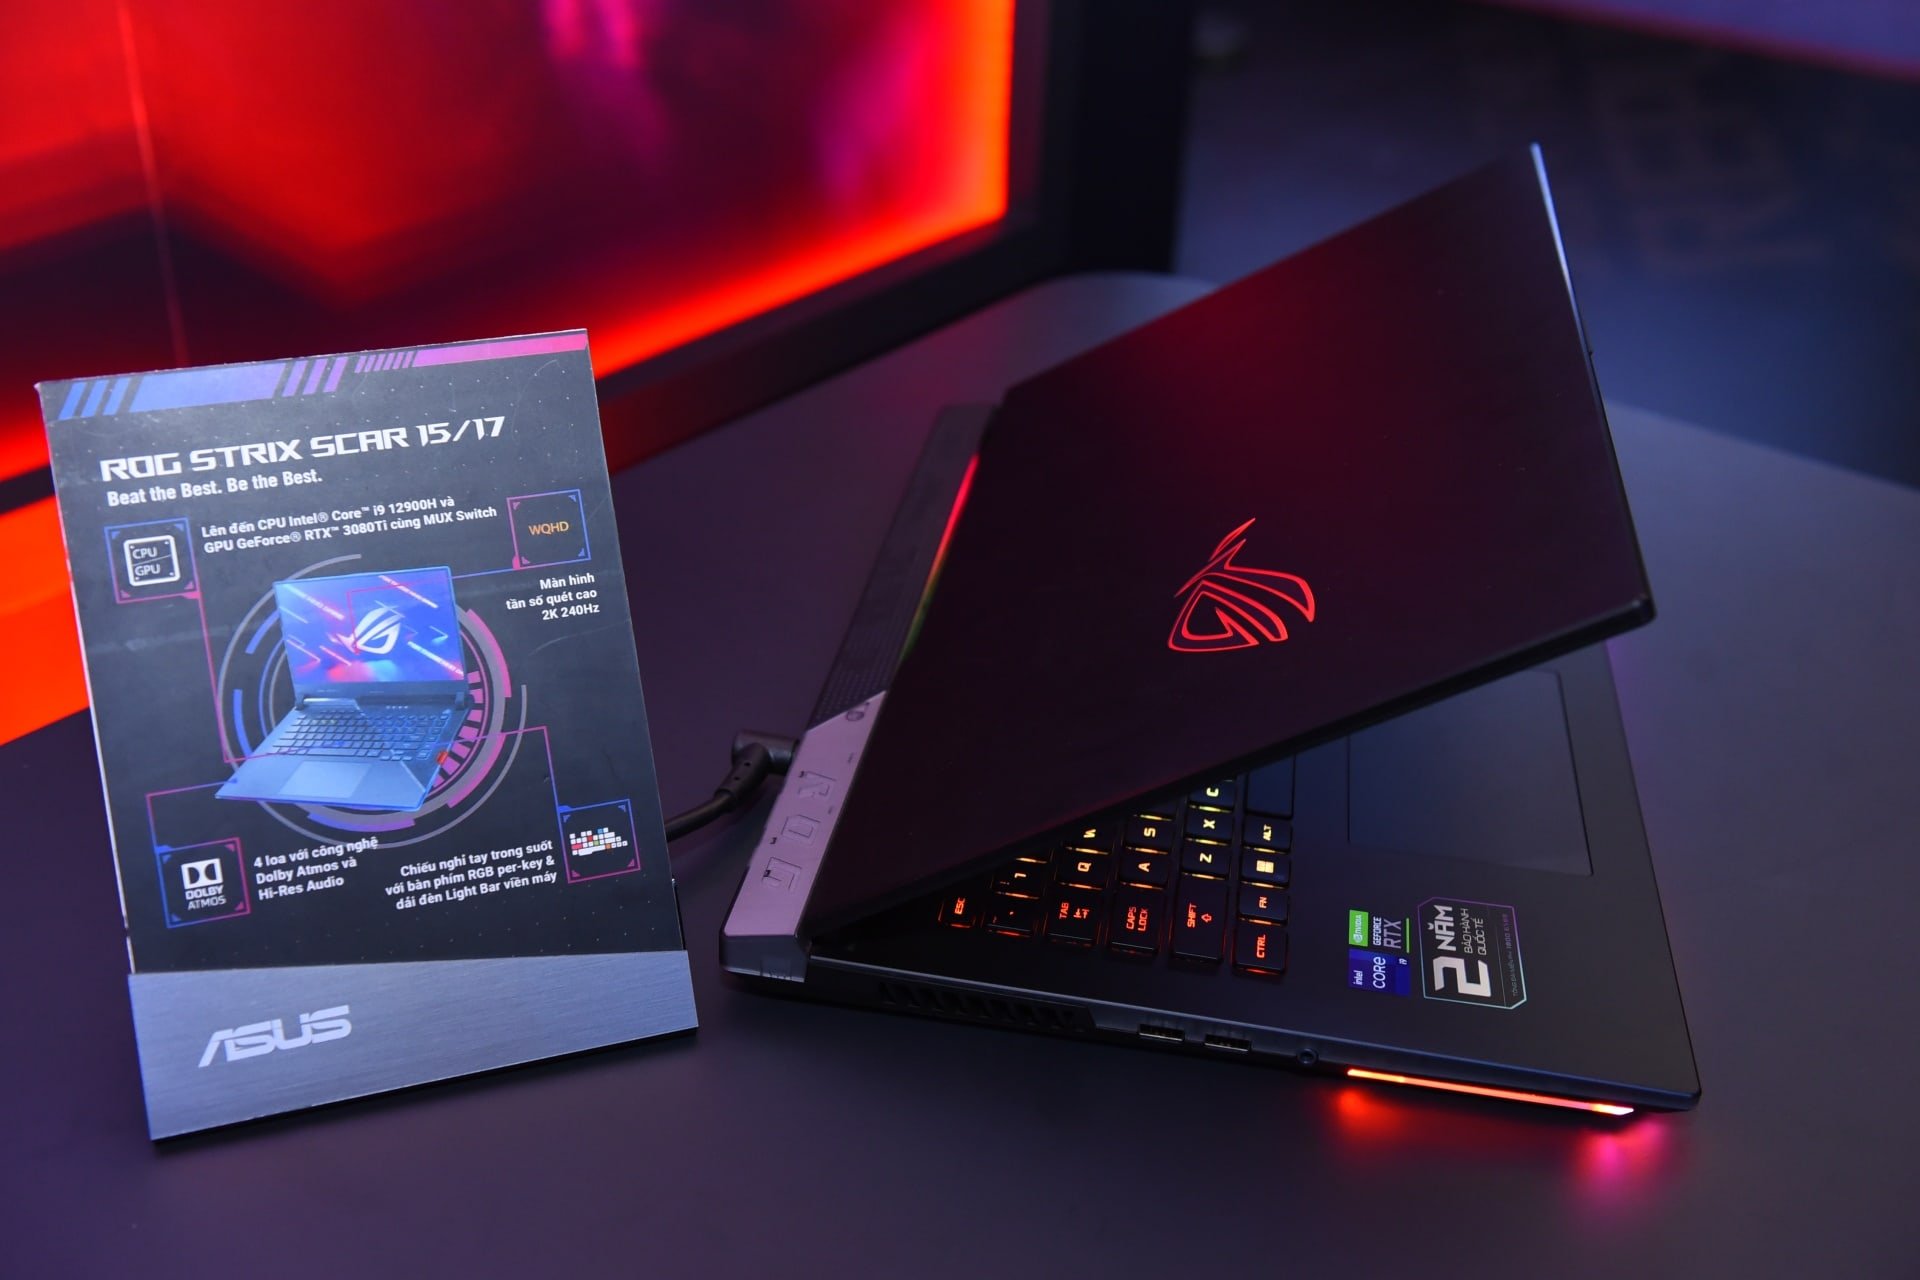 TCBC ASUS ROG khuay dao thi truong voi loat Laptop Gaming dinh dam su dung Intel the he 12 17 MMOSITE - Thông tin công nghệ, review, thủ thuật PC, gaming